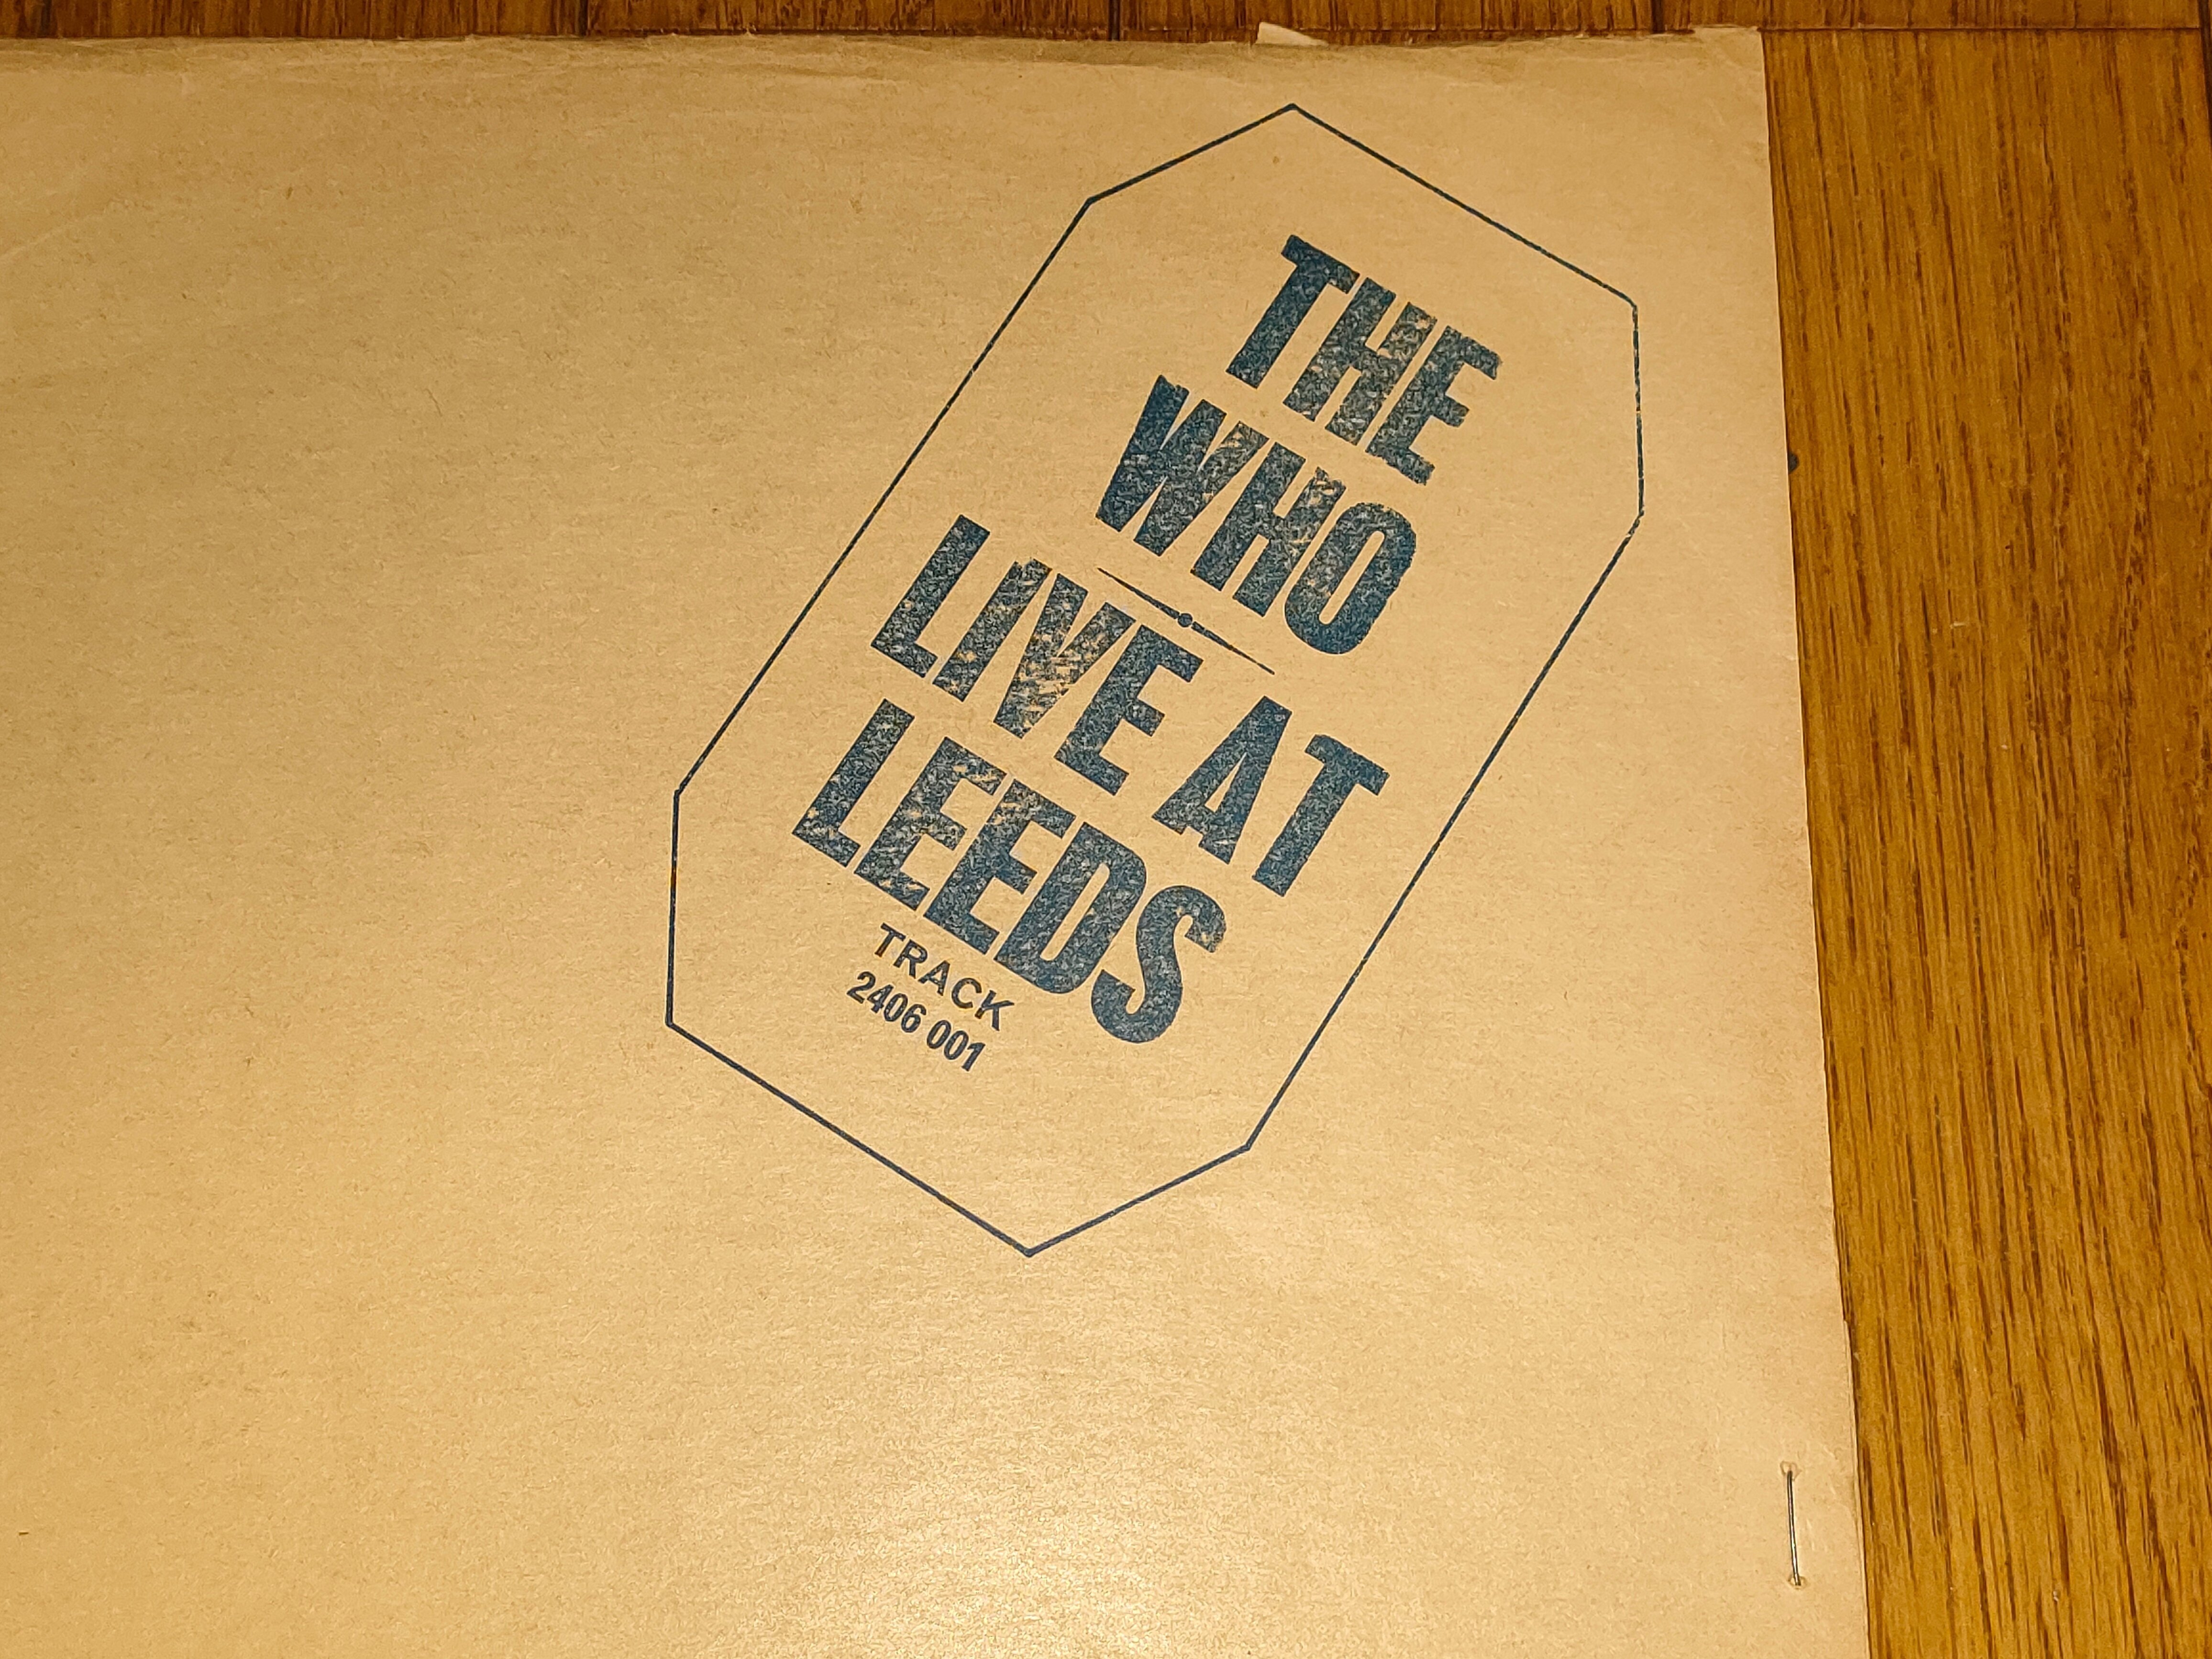 Live at Leeds】(1970) The Who 熱狂の爆音ライヴ盤｜よっしー